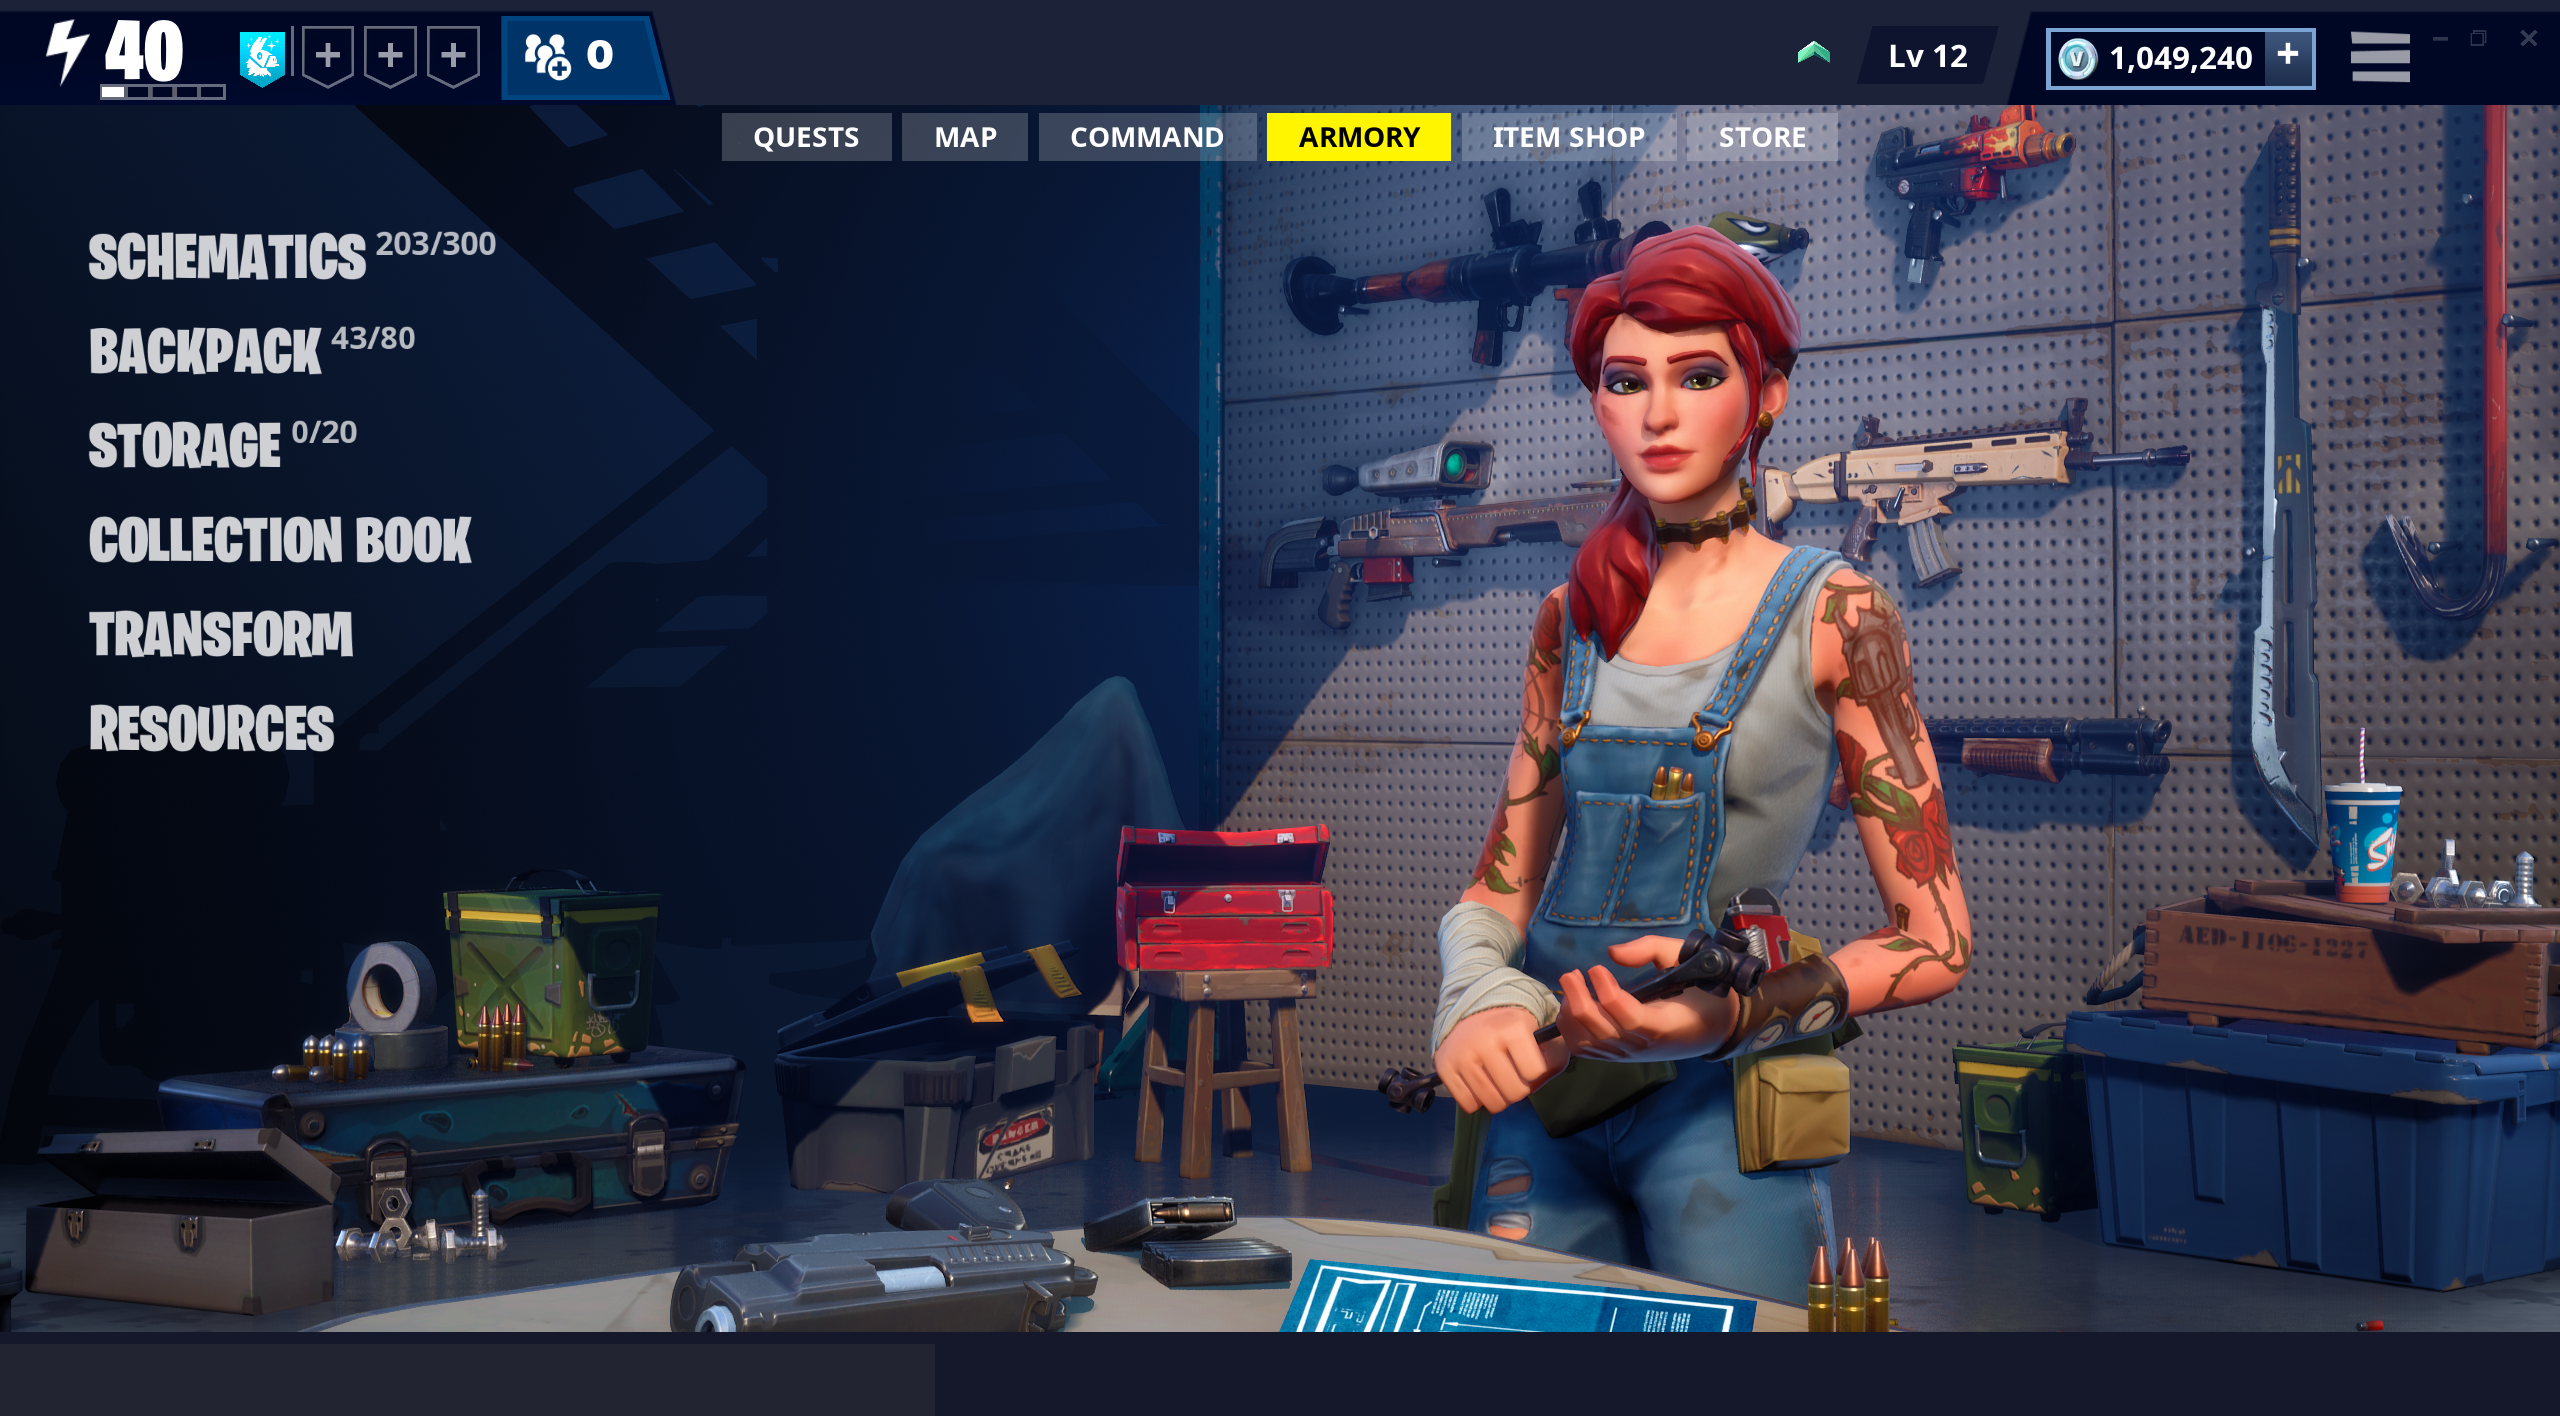 right click view image for full resolution - fortnite save the world expeditions